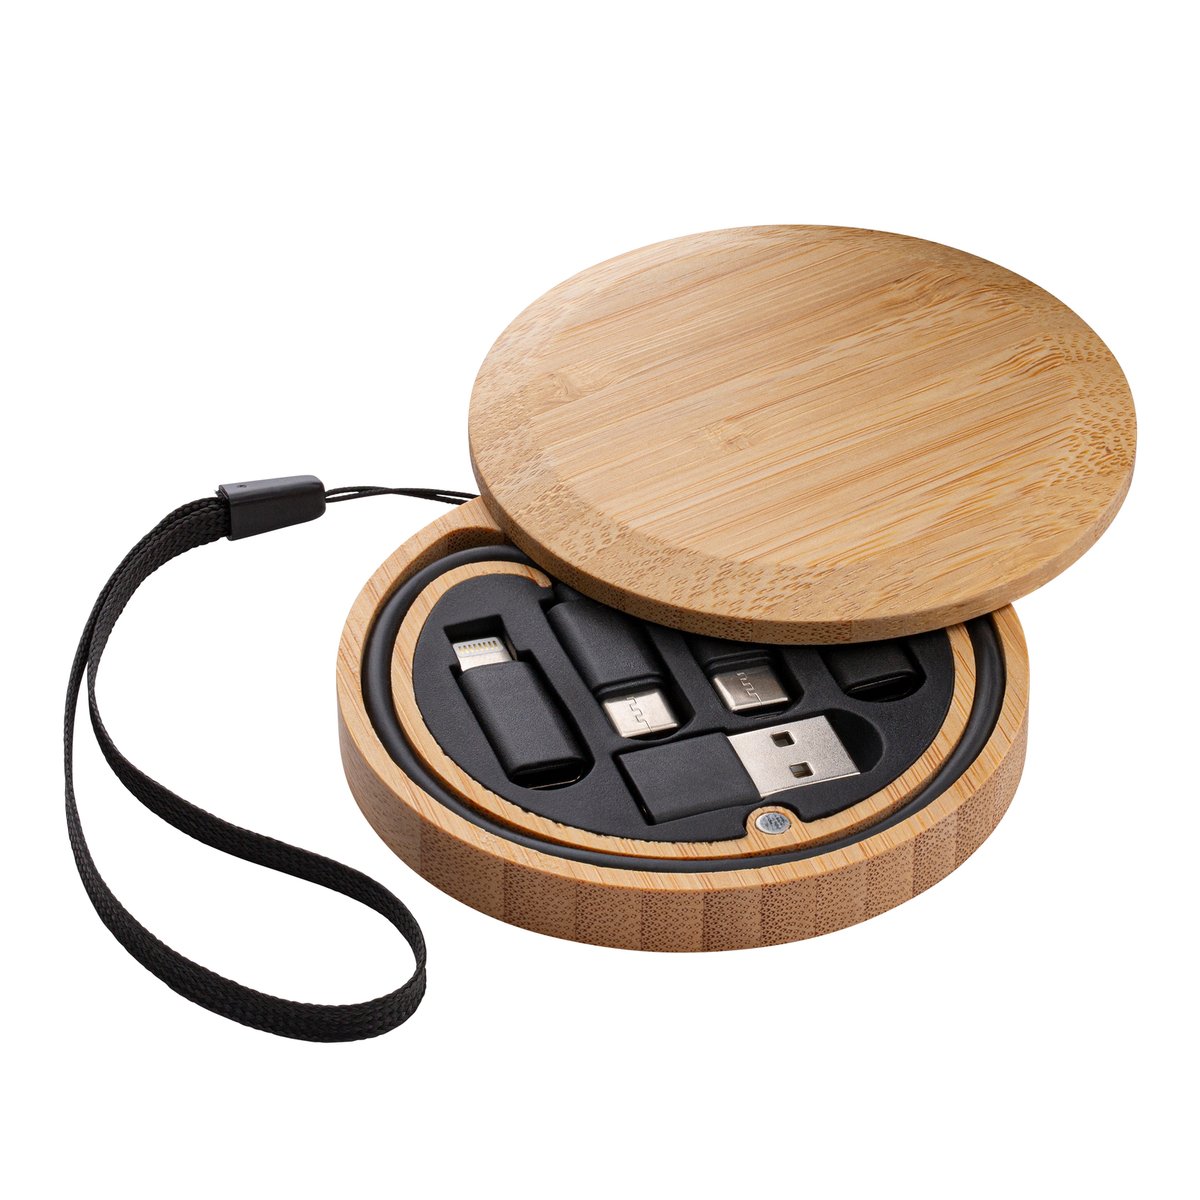 Câble de charge 6 in 1 REEVES-CONVERTICS BAMBOO marron